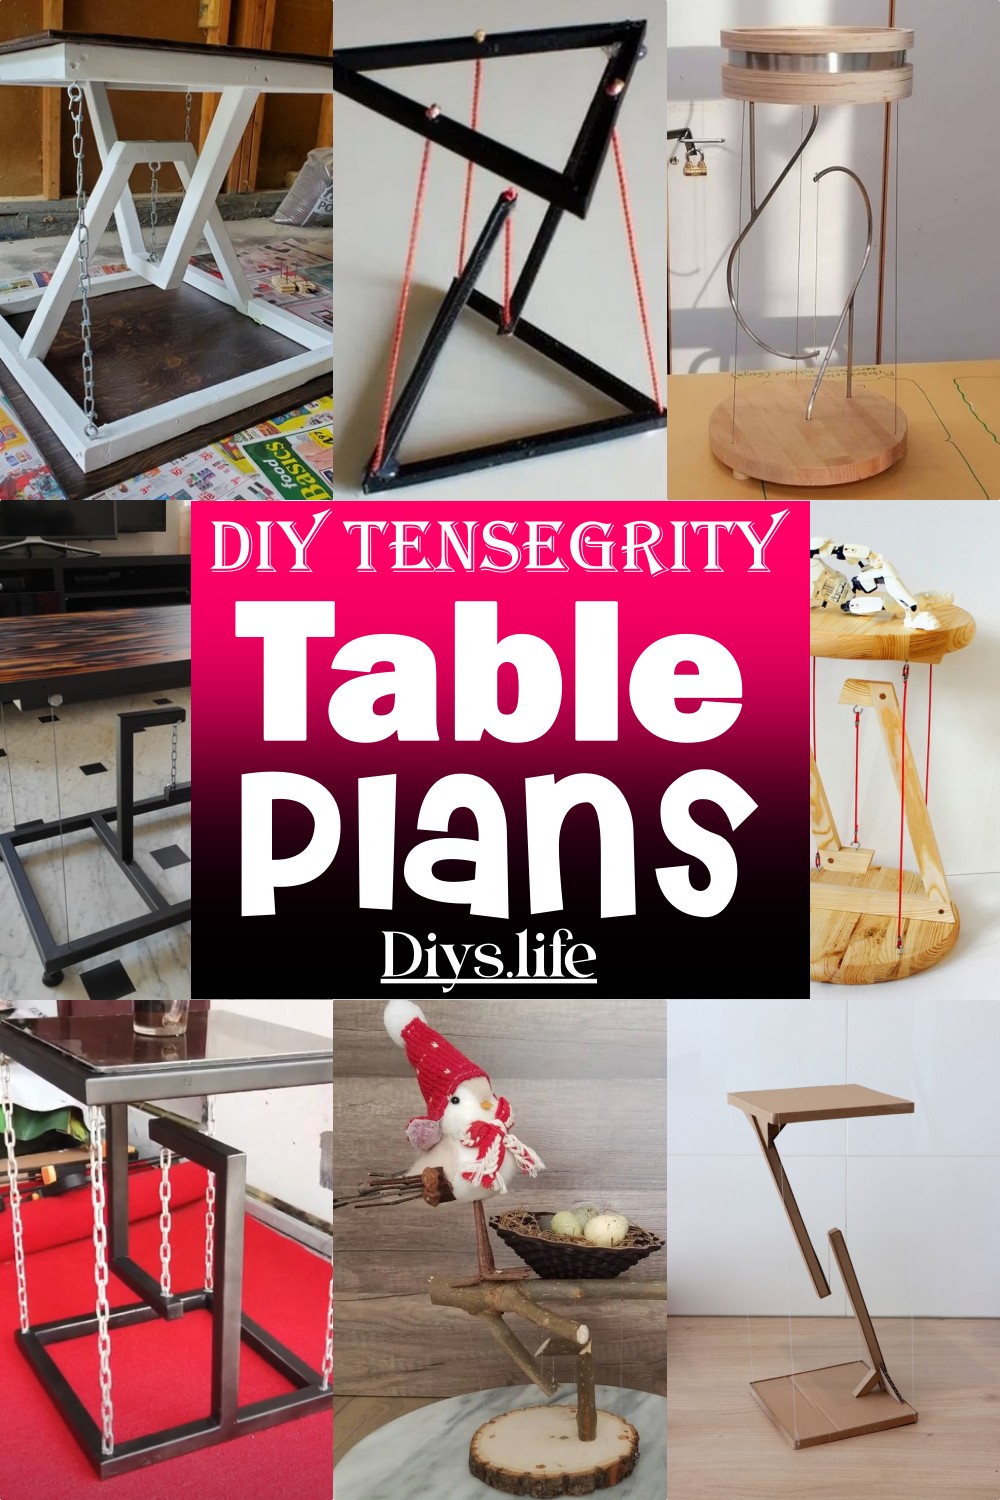 DIY Tensegrity Table Plans for everyone